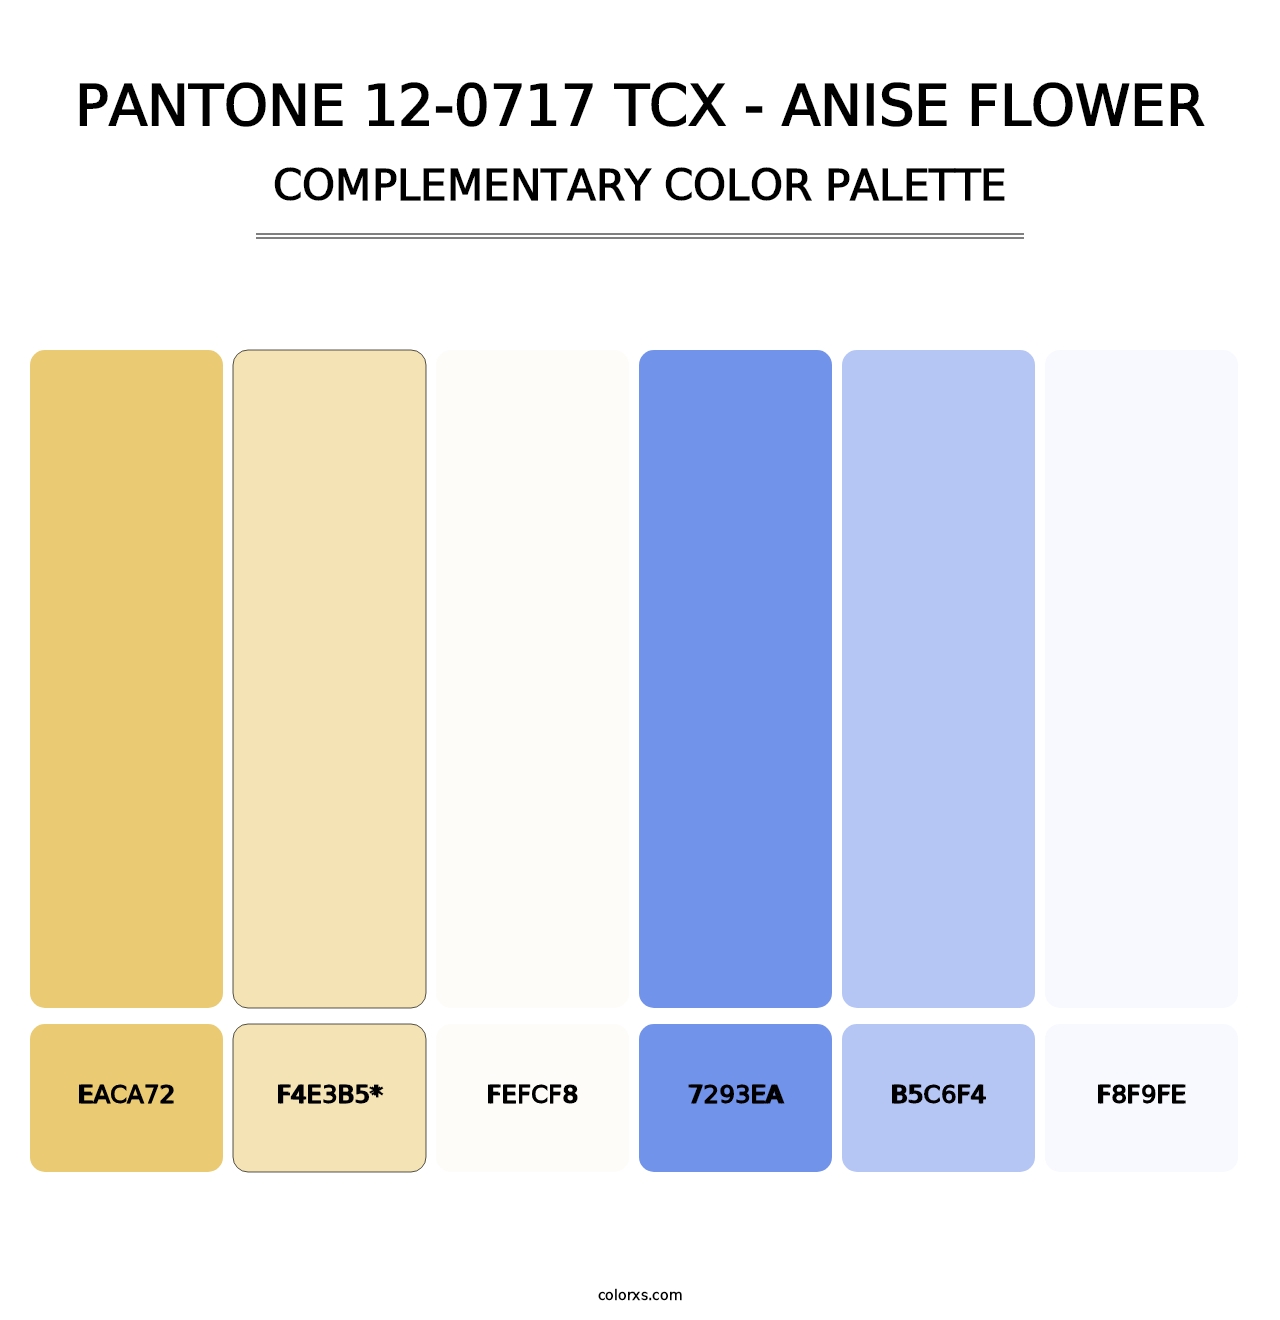 PANTONE 12-0717 TCX - Anise Flower - Complementary Color Palette